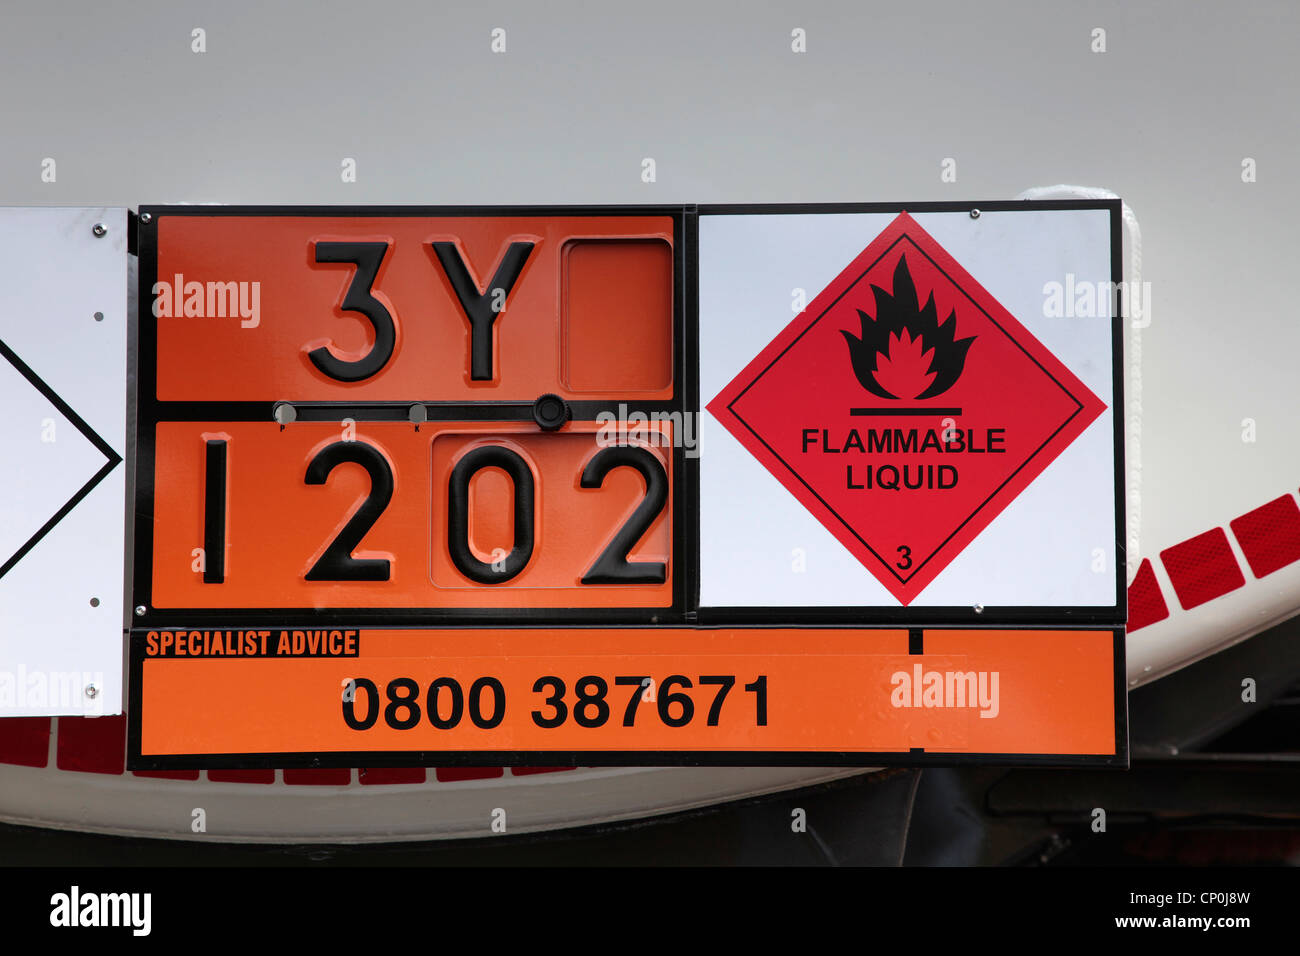 Safety sign on an Oil Tanker showing flammable liquid Stock Photo